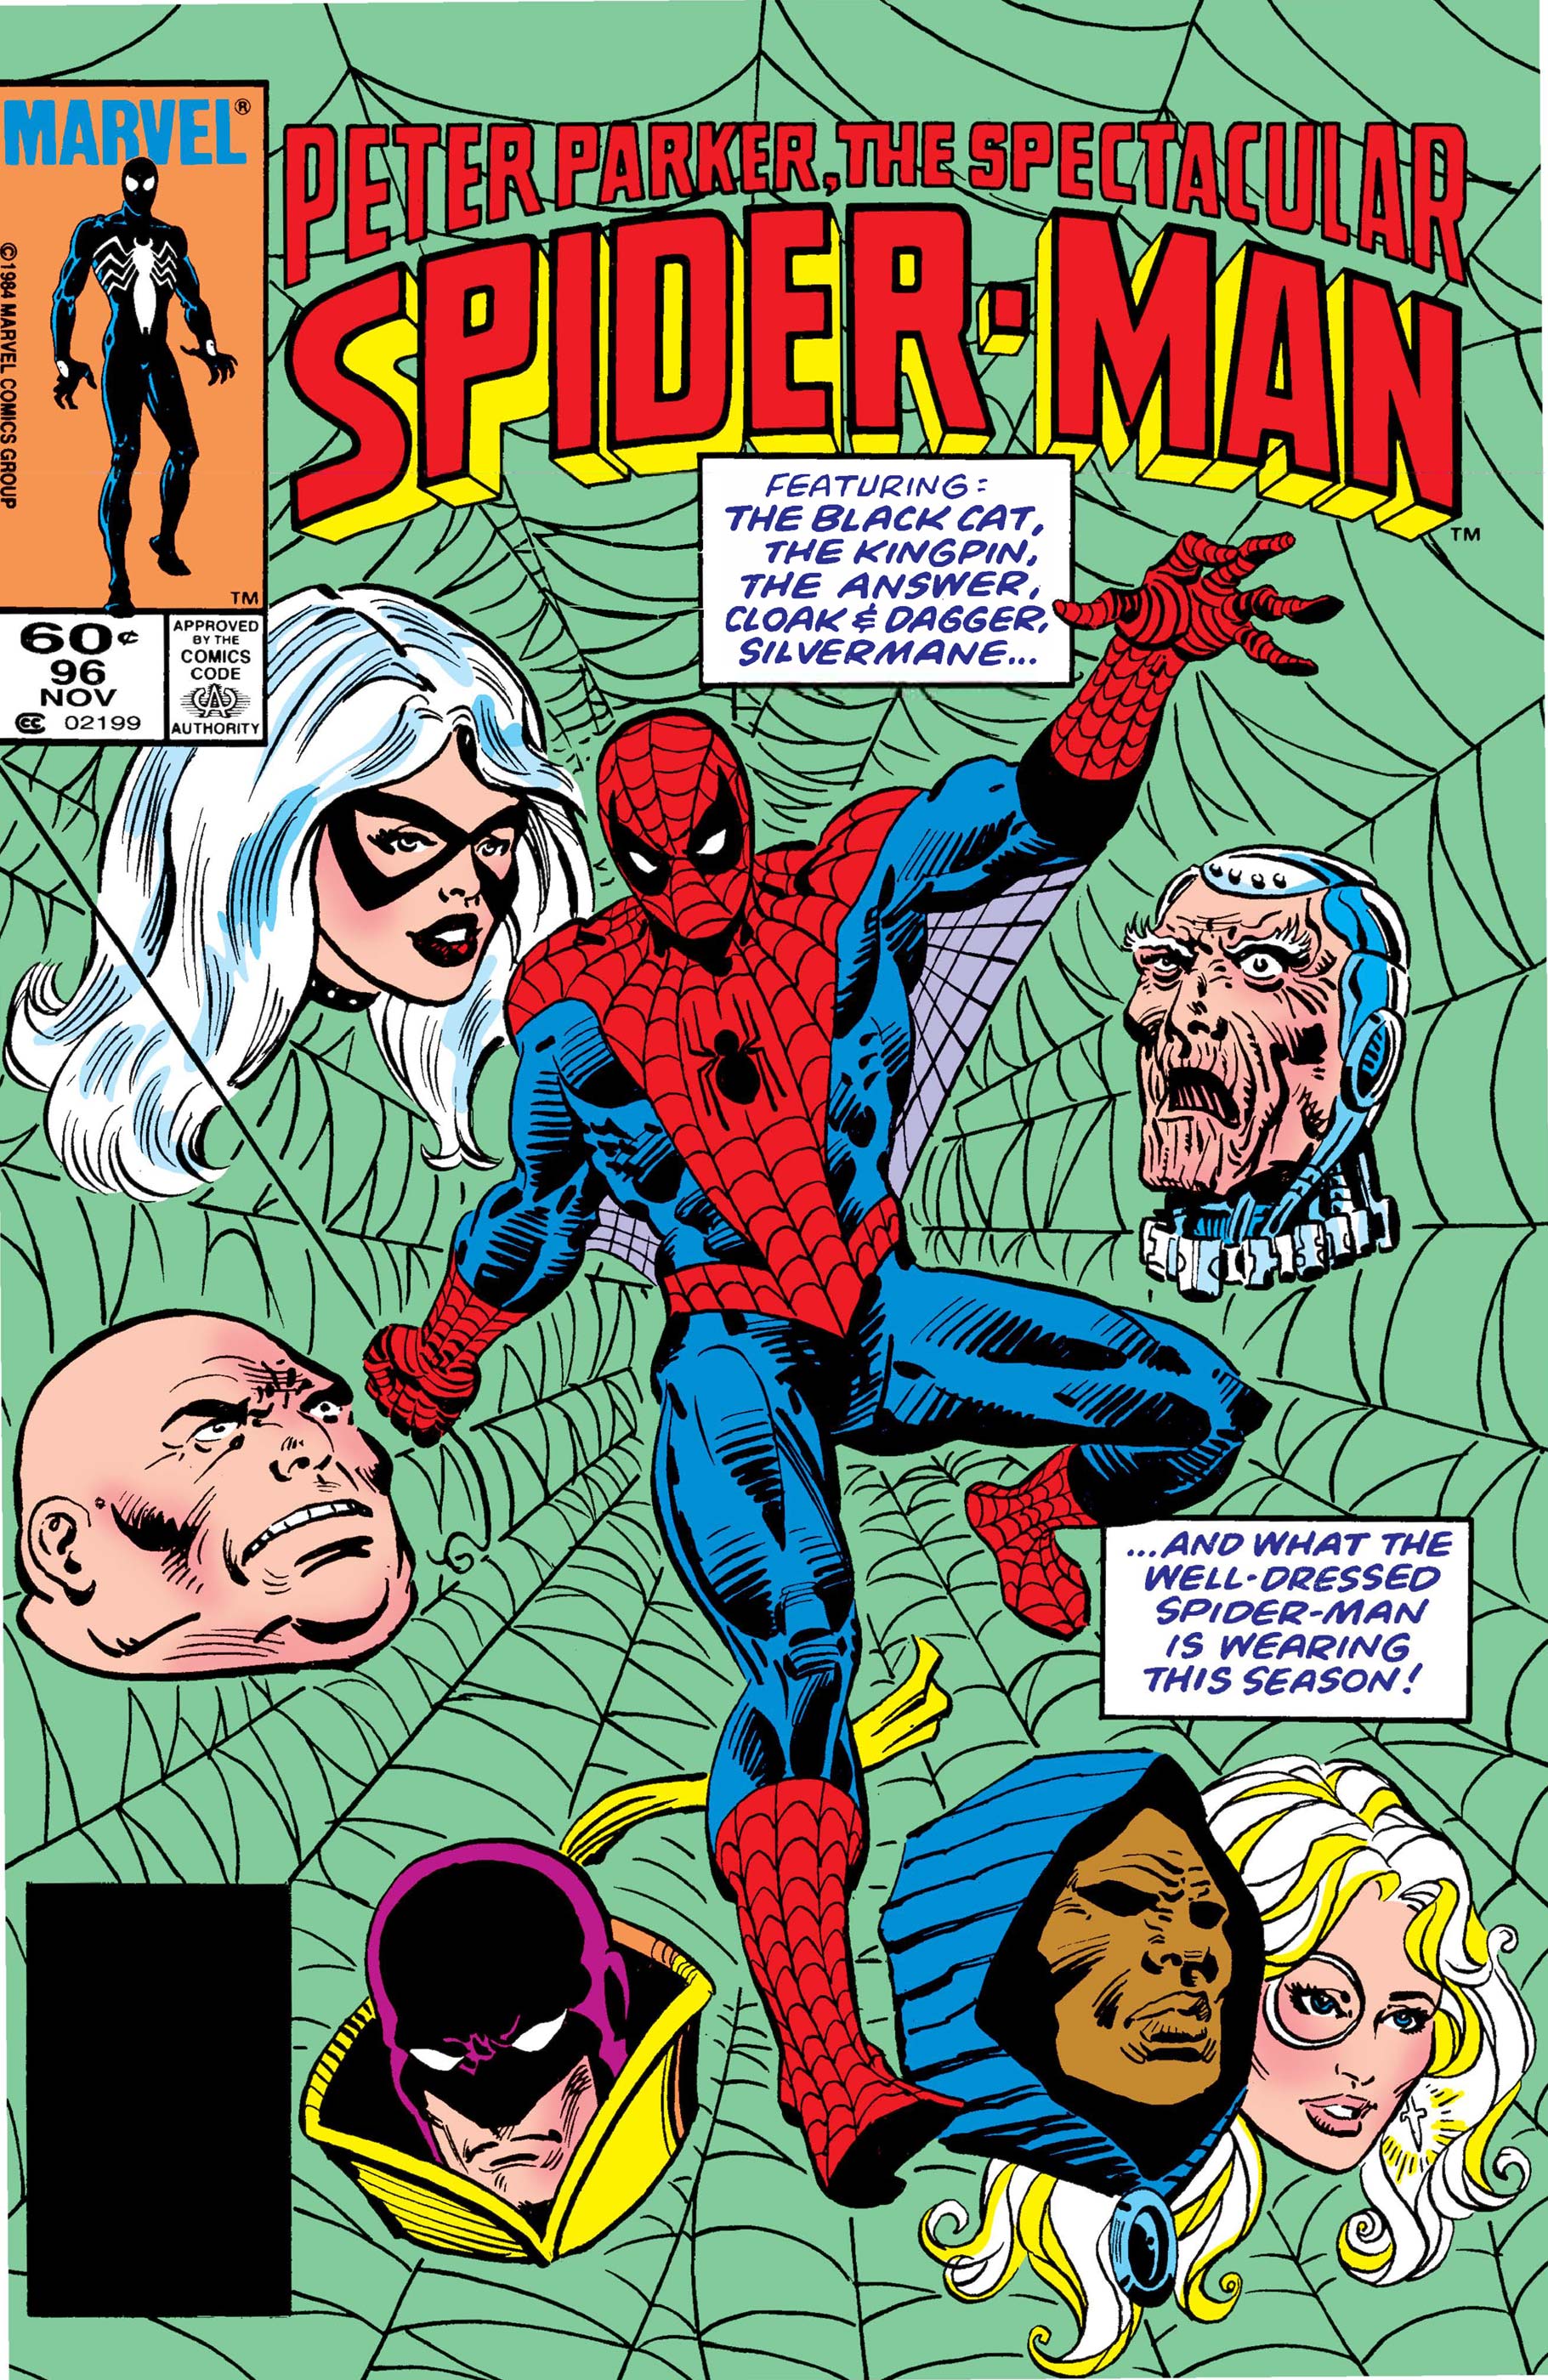 Peter Parker, the Spectacular Spider-Man (1976) #96 | Comic Issues | Marvel